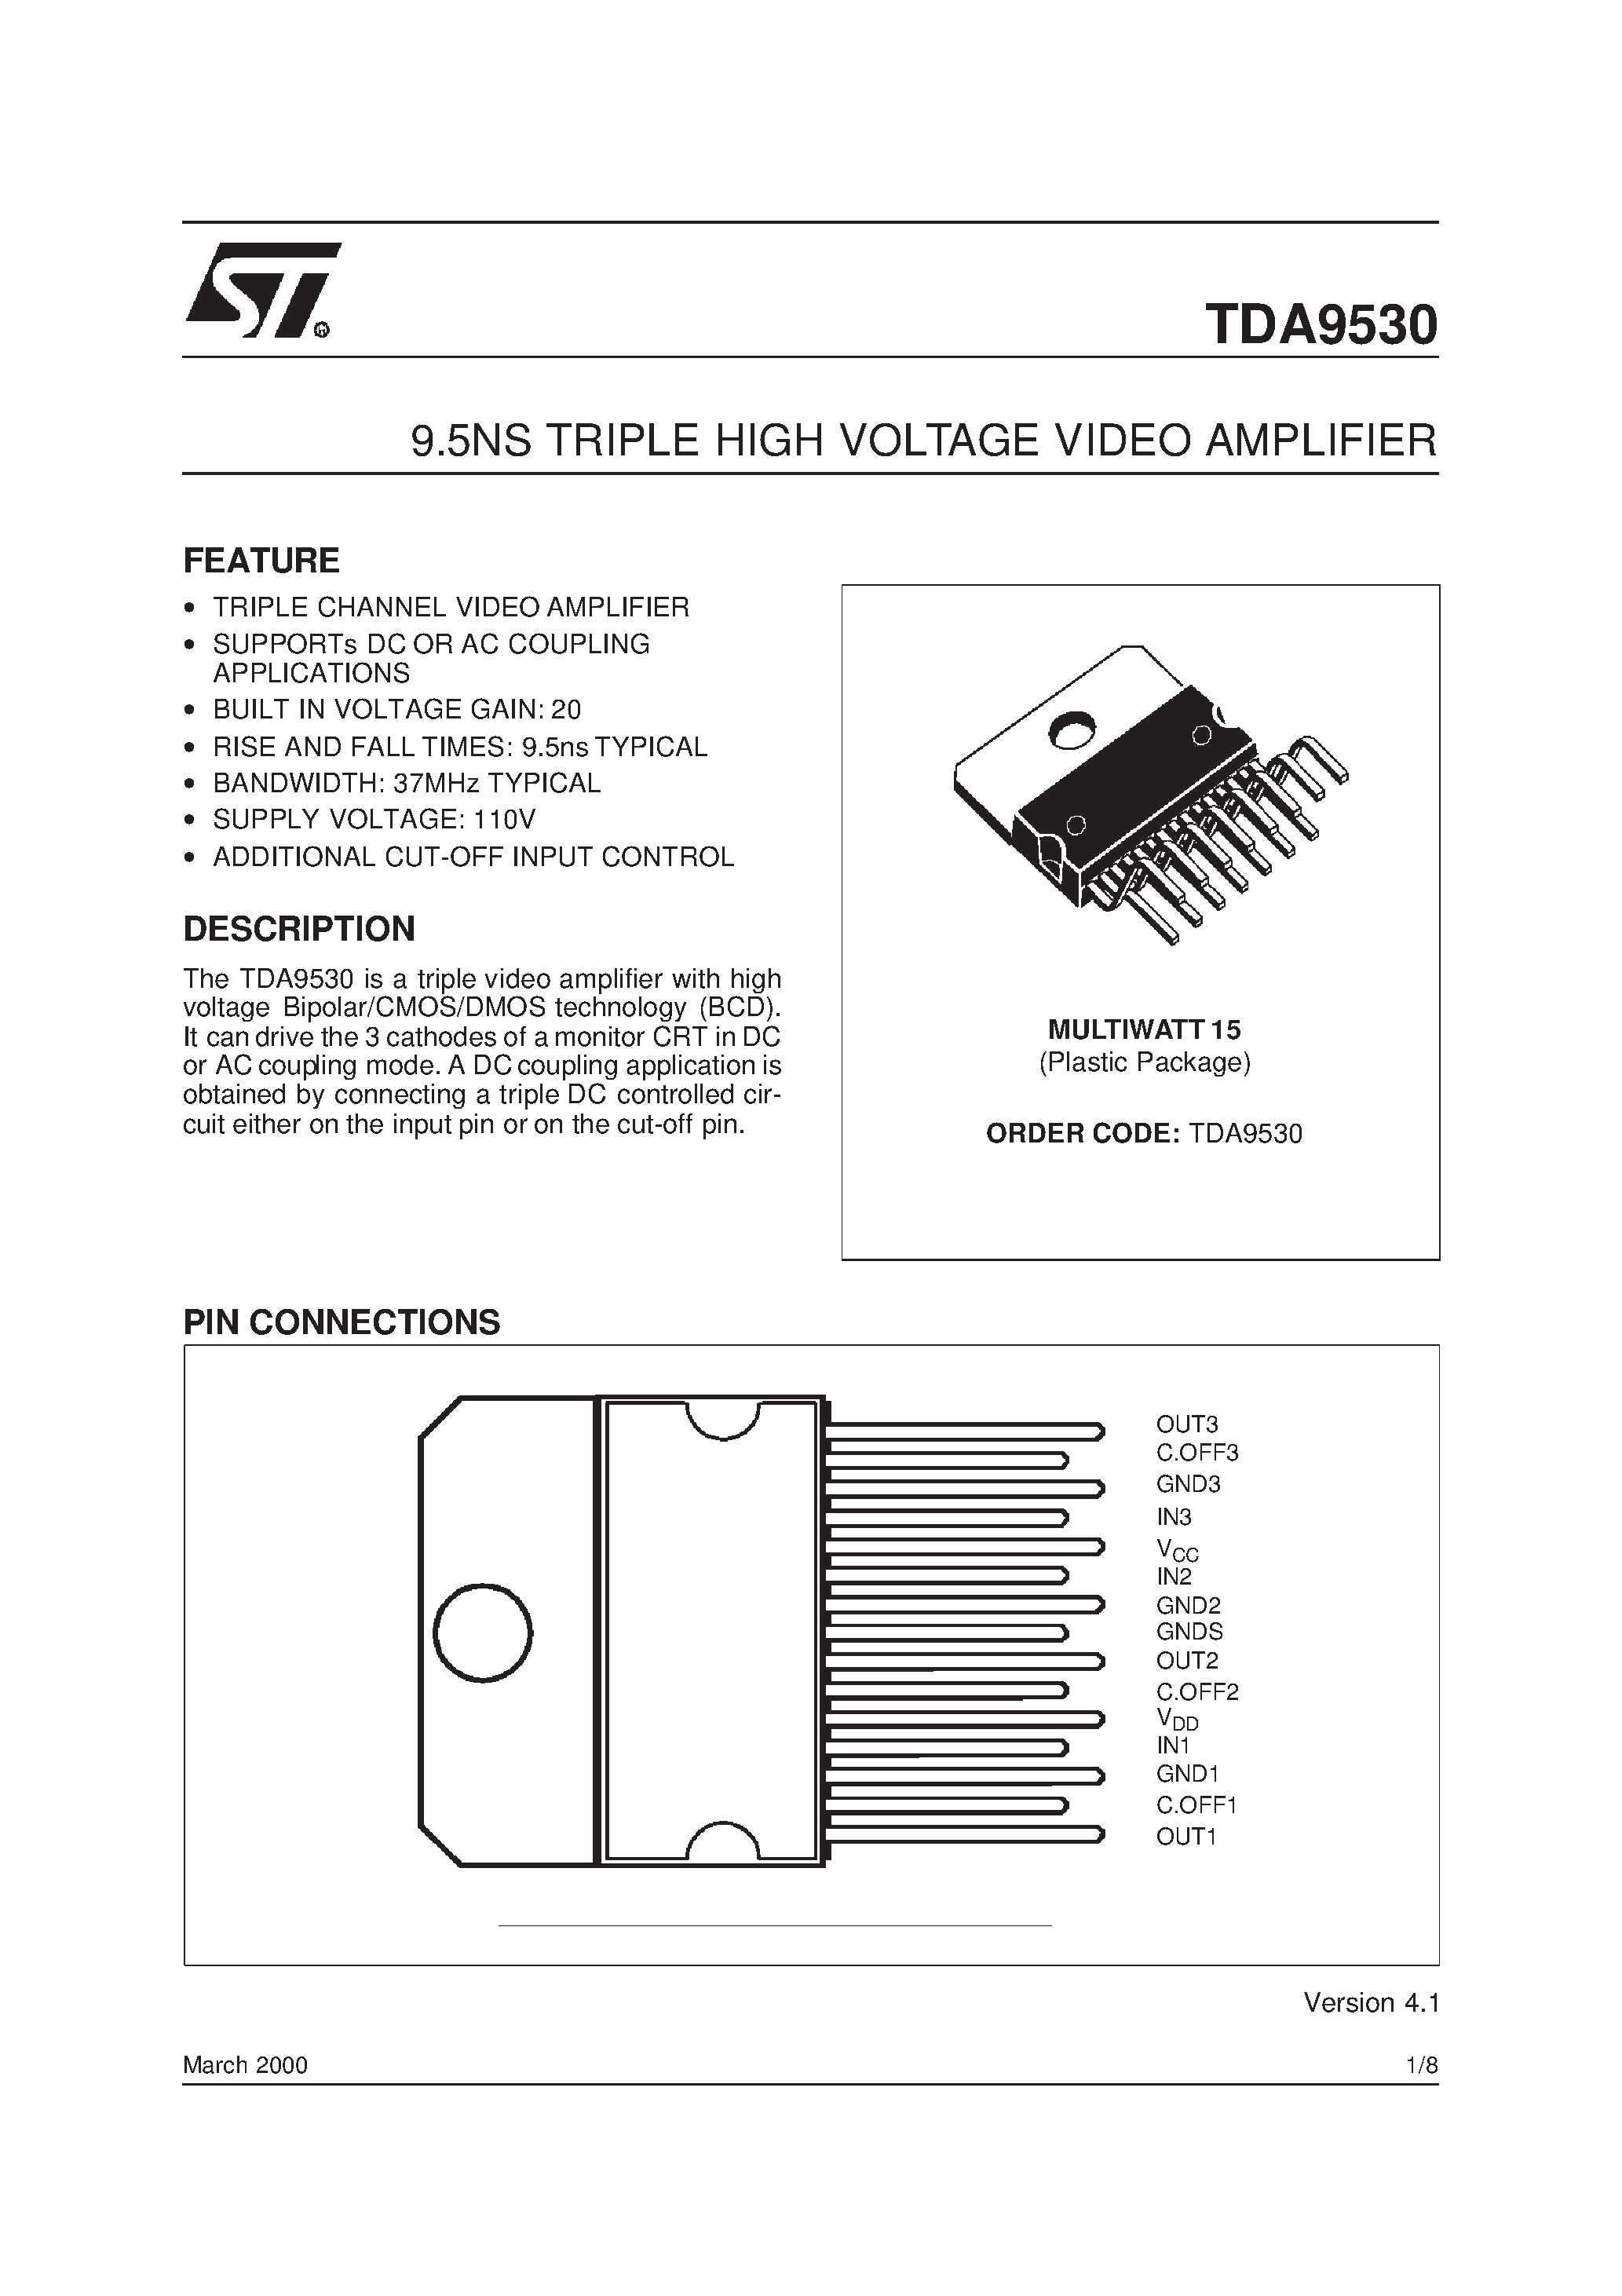 Datasheet TDA9530 - 9.5NS TRIPLE HIGH VOLTAGE VIDEO AMPLIFIER page 1